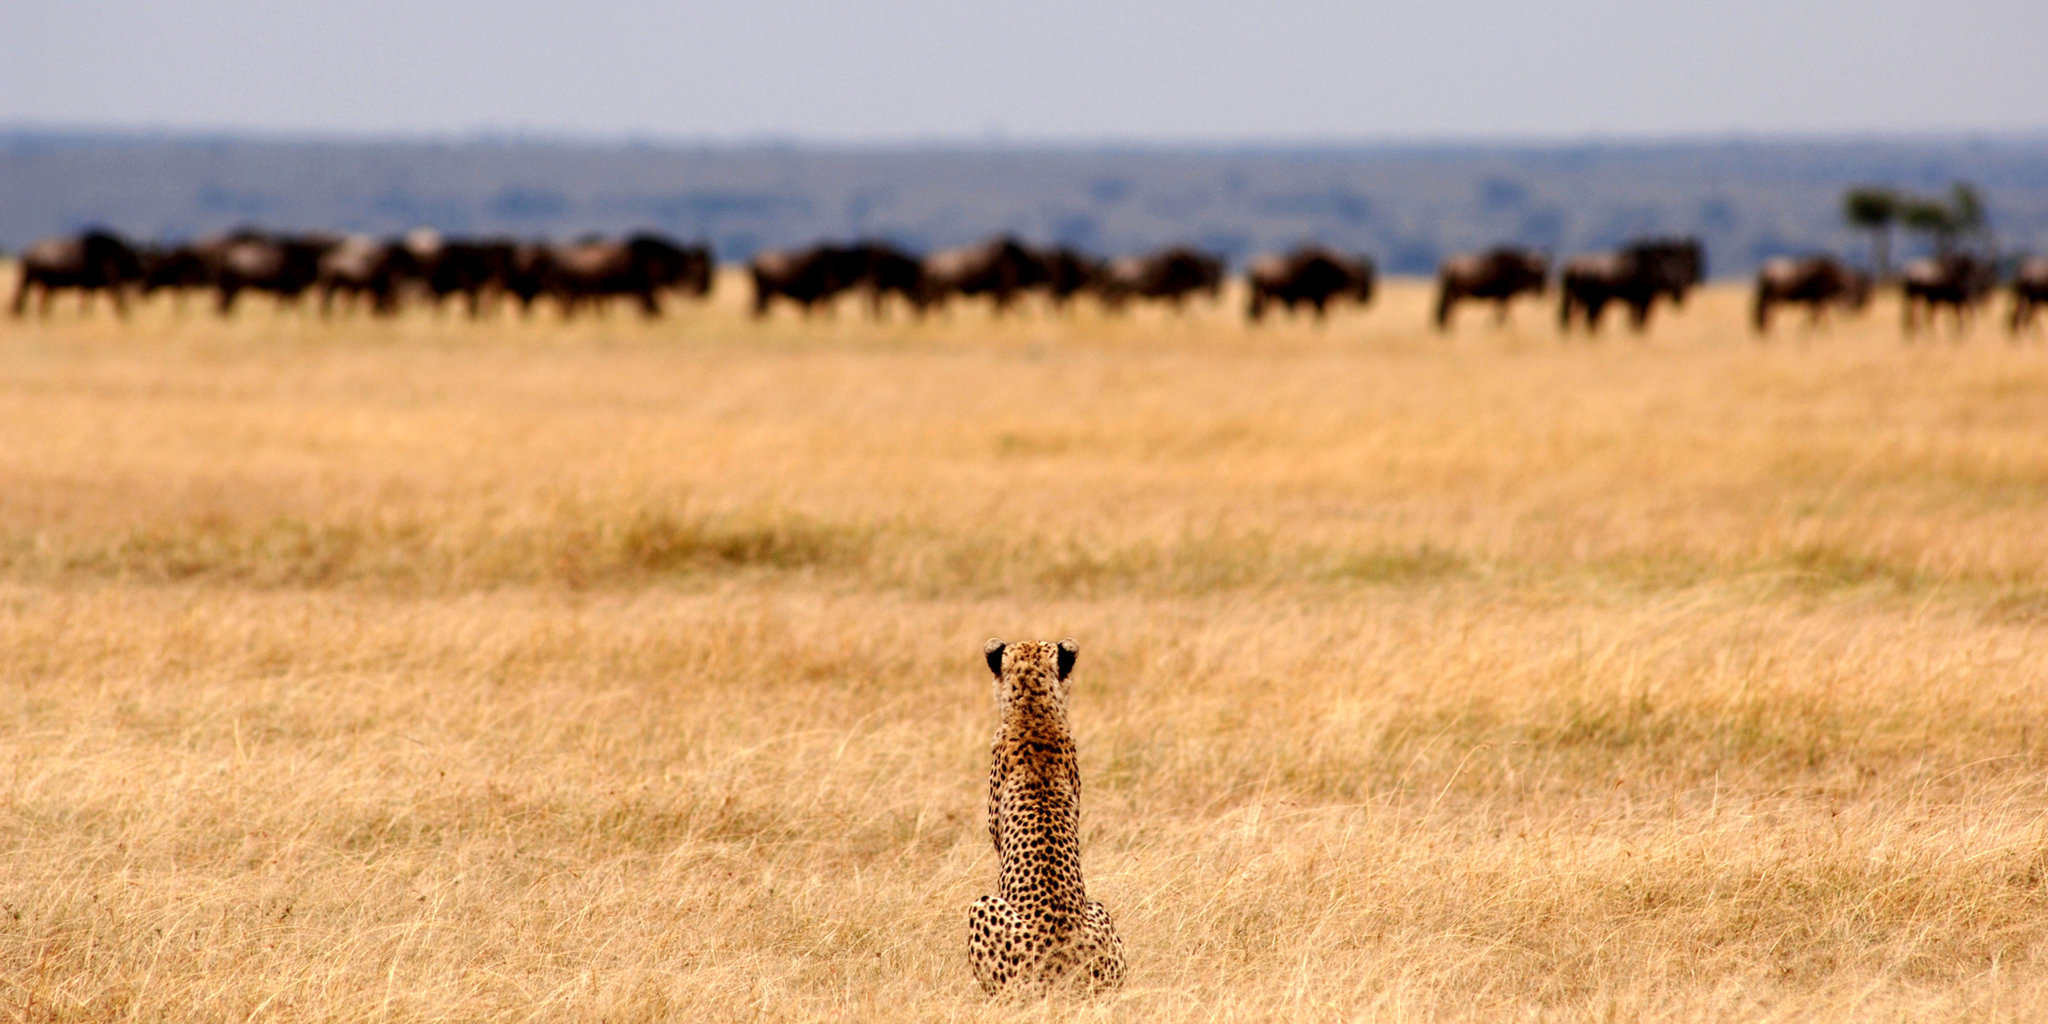 Cheetahs are coming back: A guide on how not to confuse them with